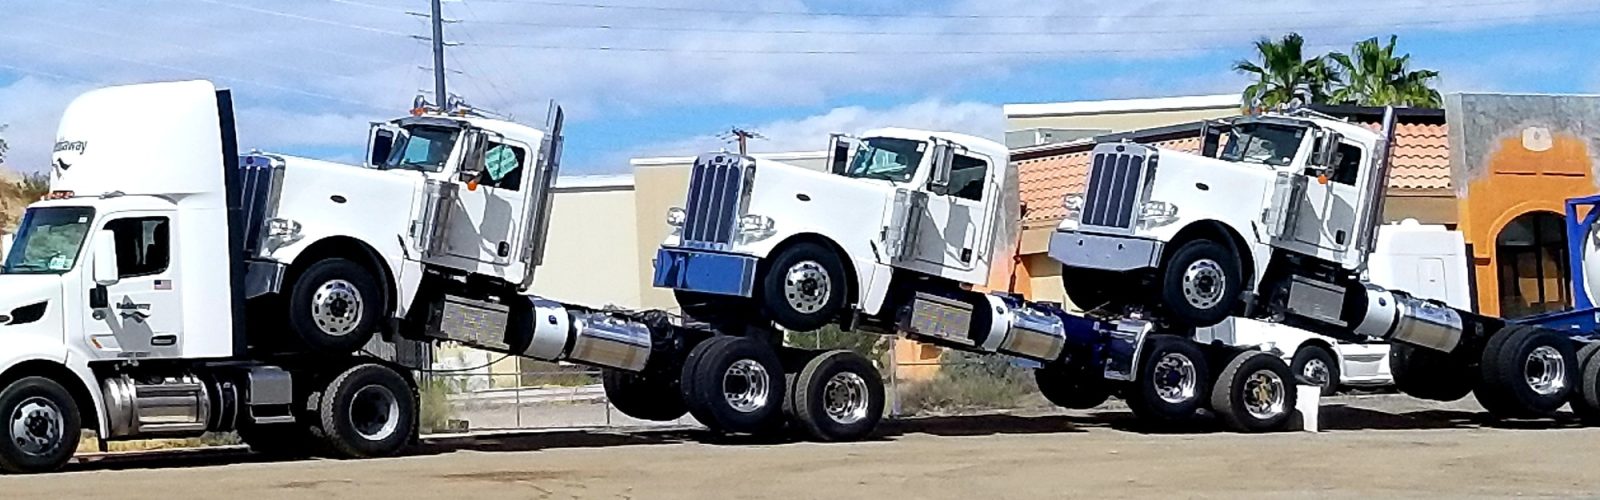 The Ultimate Guide to Flatbed Towing in Minneapolis Trucking! Piggyback! Hauling Big Rigs Piggy Back!